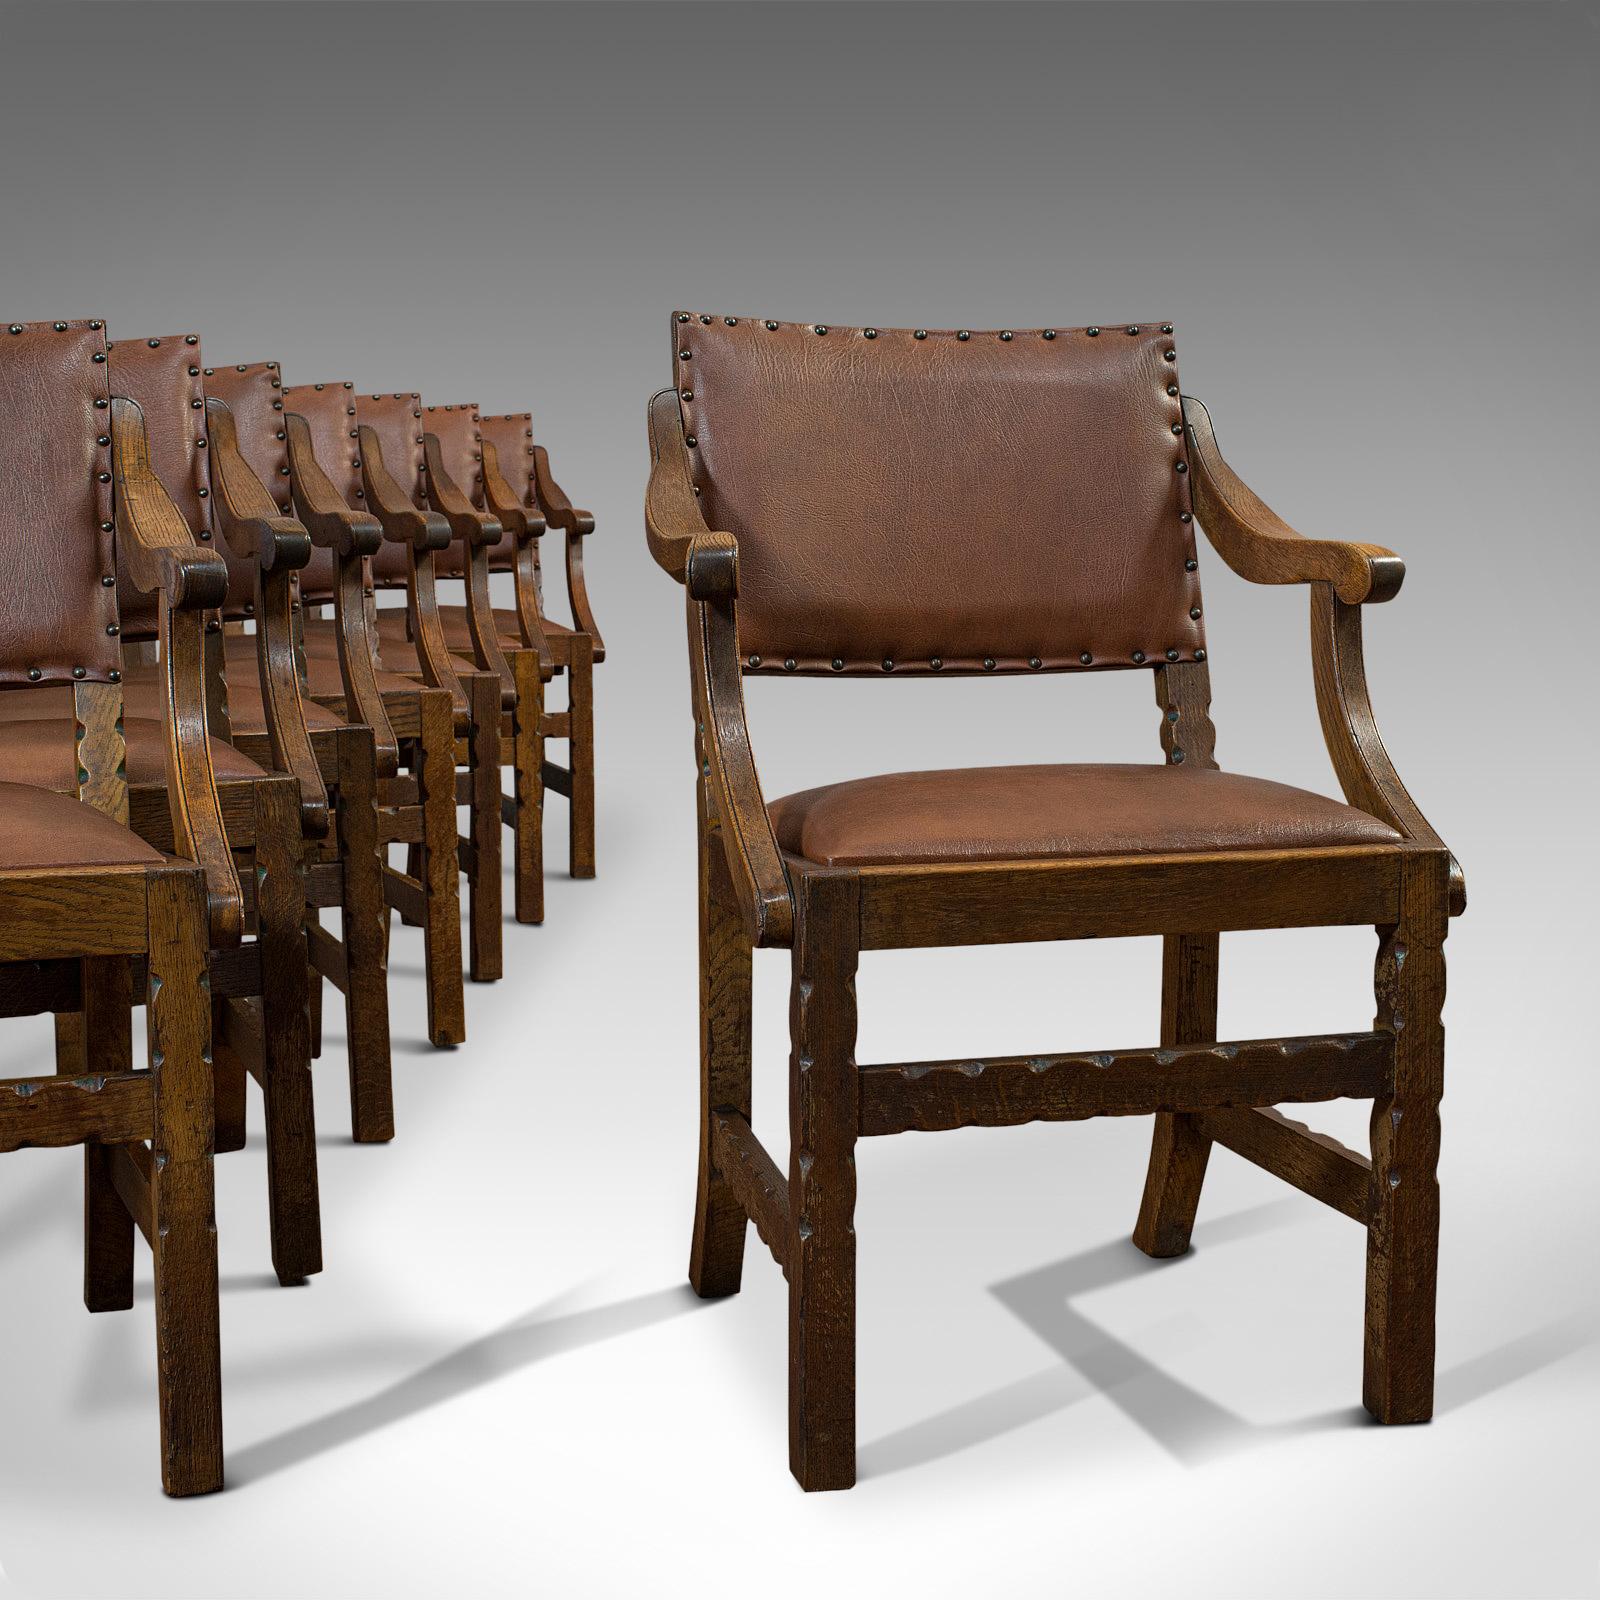 This is a set of 8 antique dining chairs. An oak, faux leather upholstered seat in Arts & Crafts taste by Hamptons, dating to the Edwardian period of the early 20th century, circa 1910.

Attractive and generous set of chairs
Displays a desirable